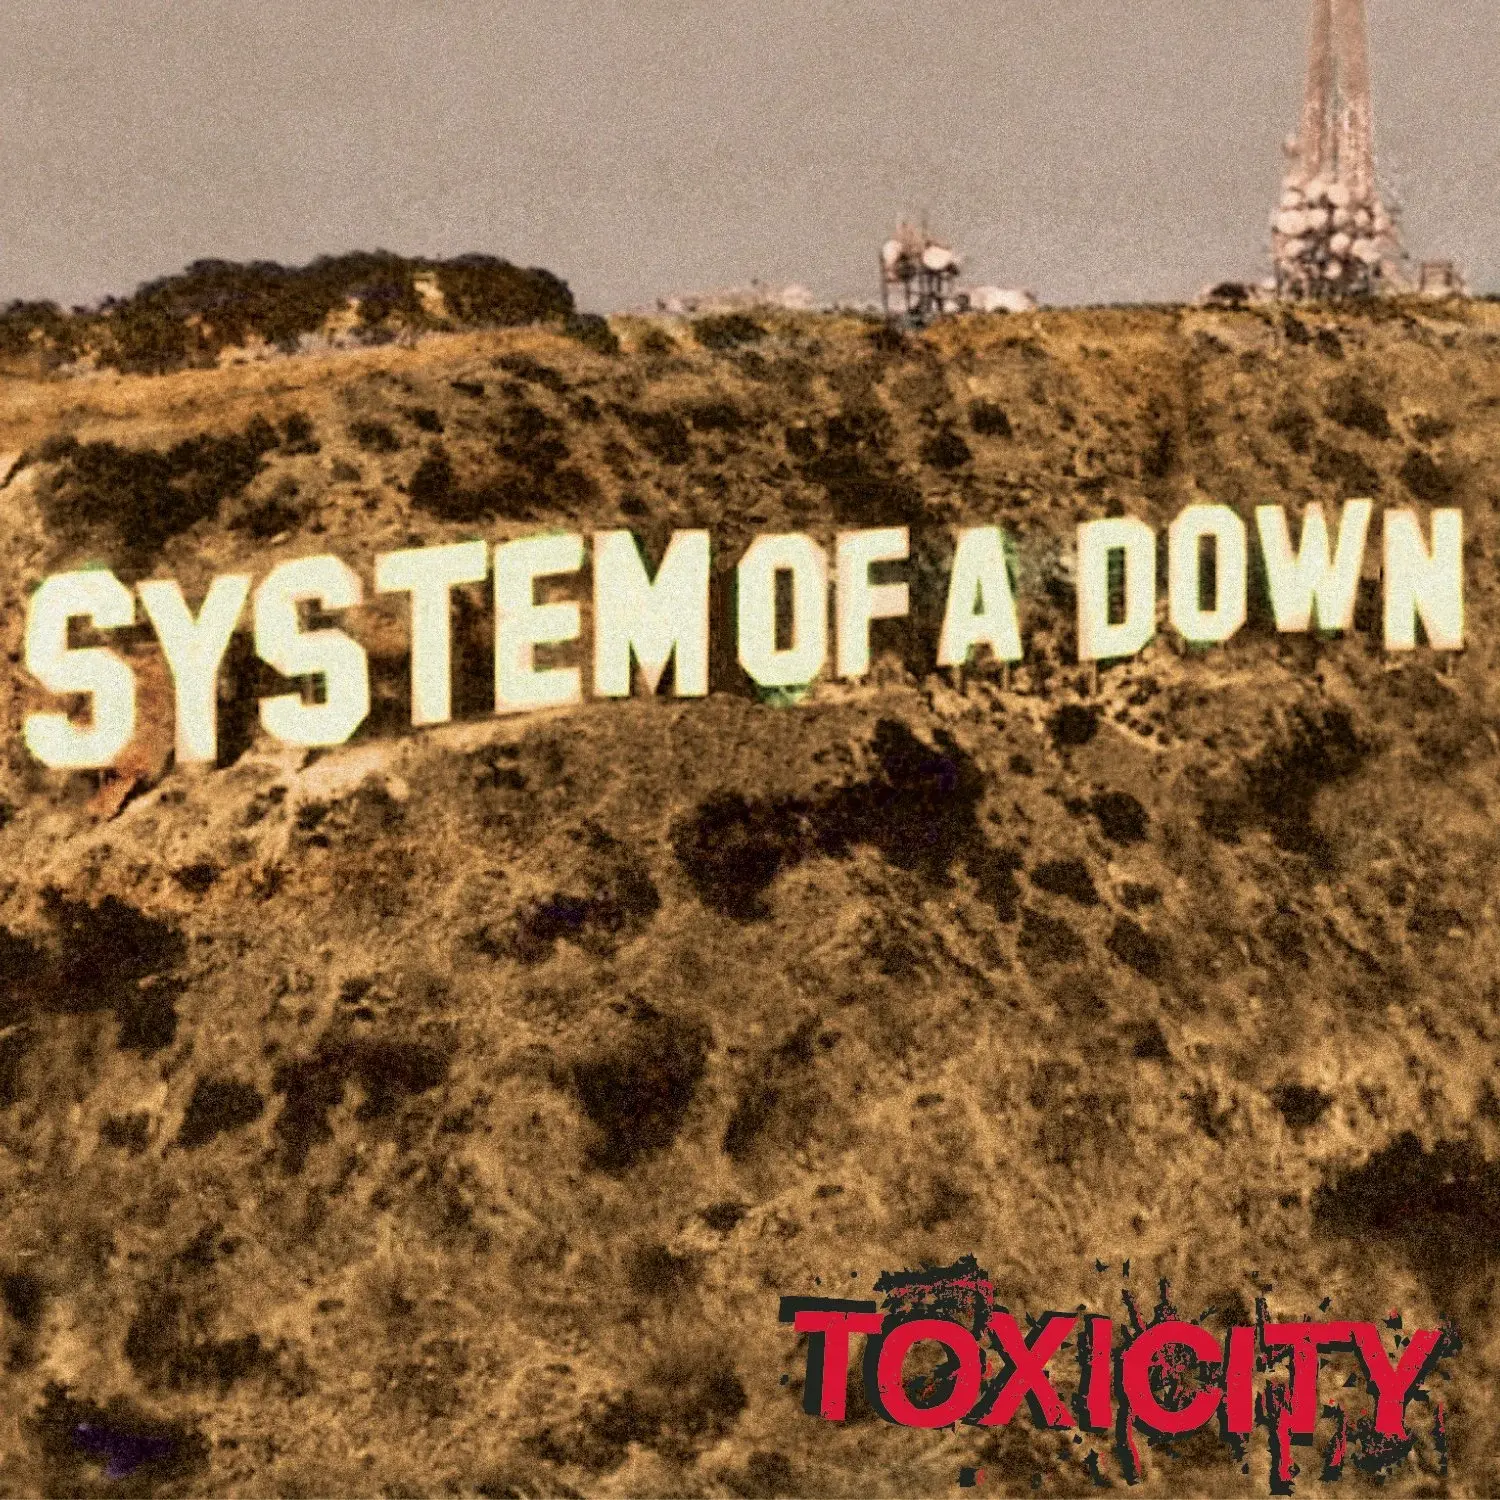 Cover of the album "Toxicity" by System of a Down, showing the Hollywood sign replaced by the name of the band